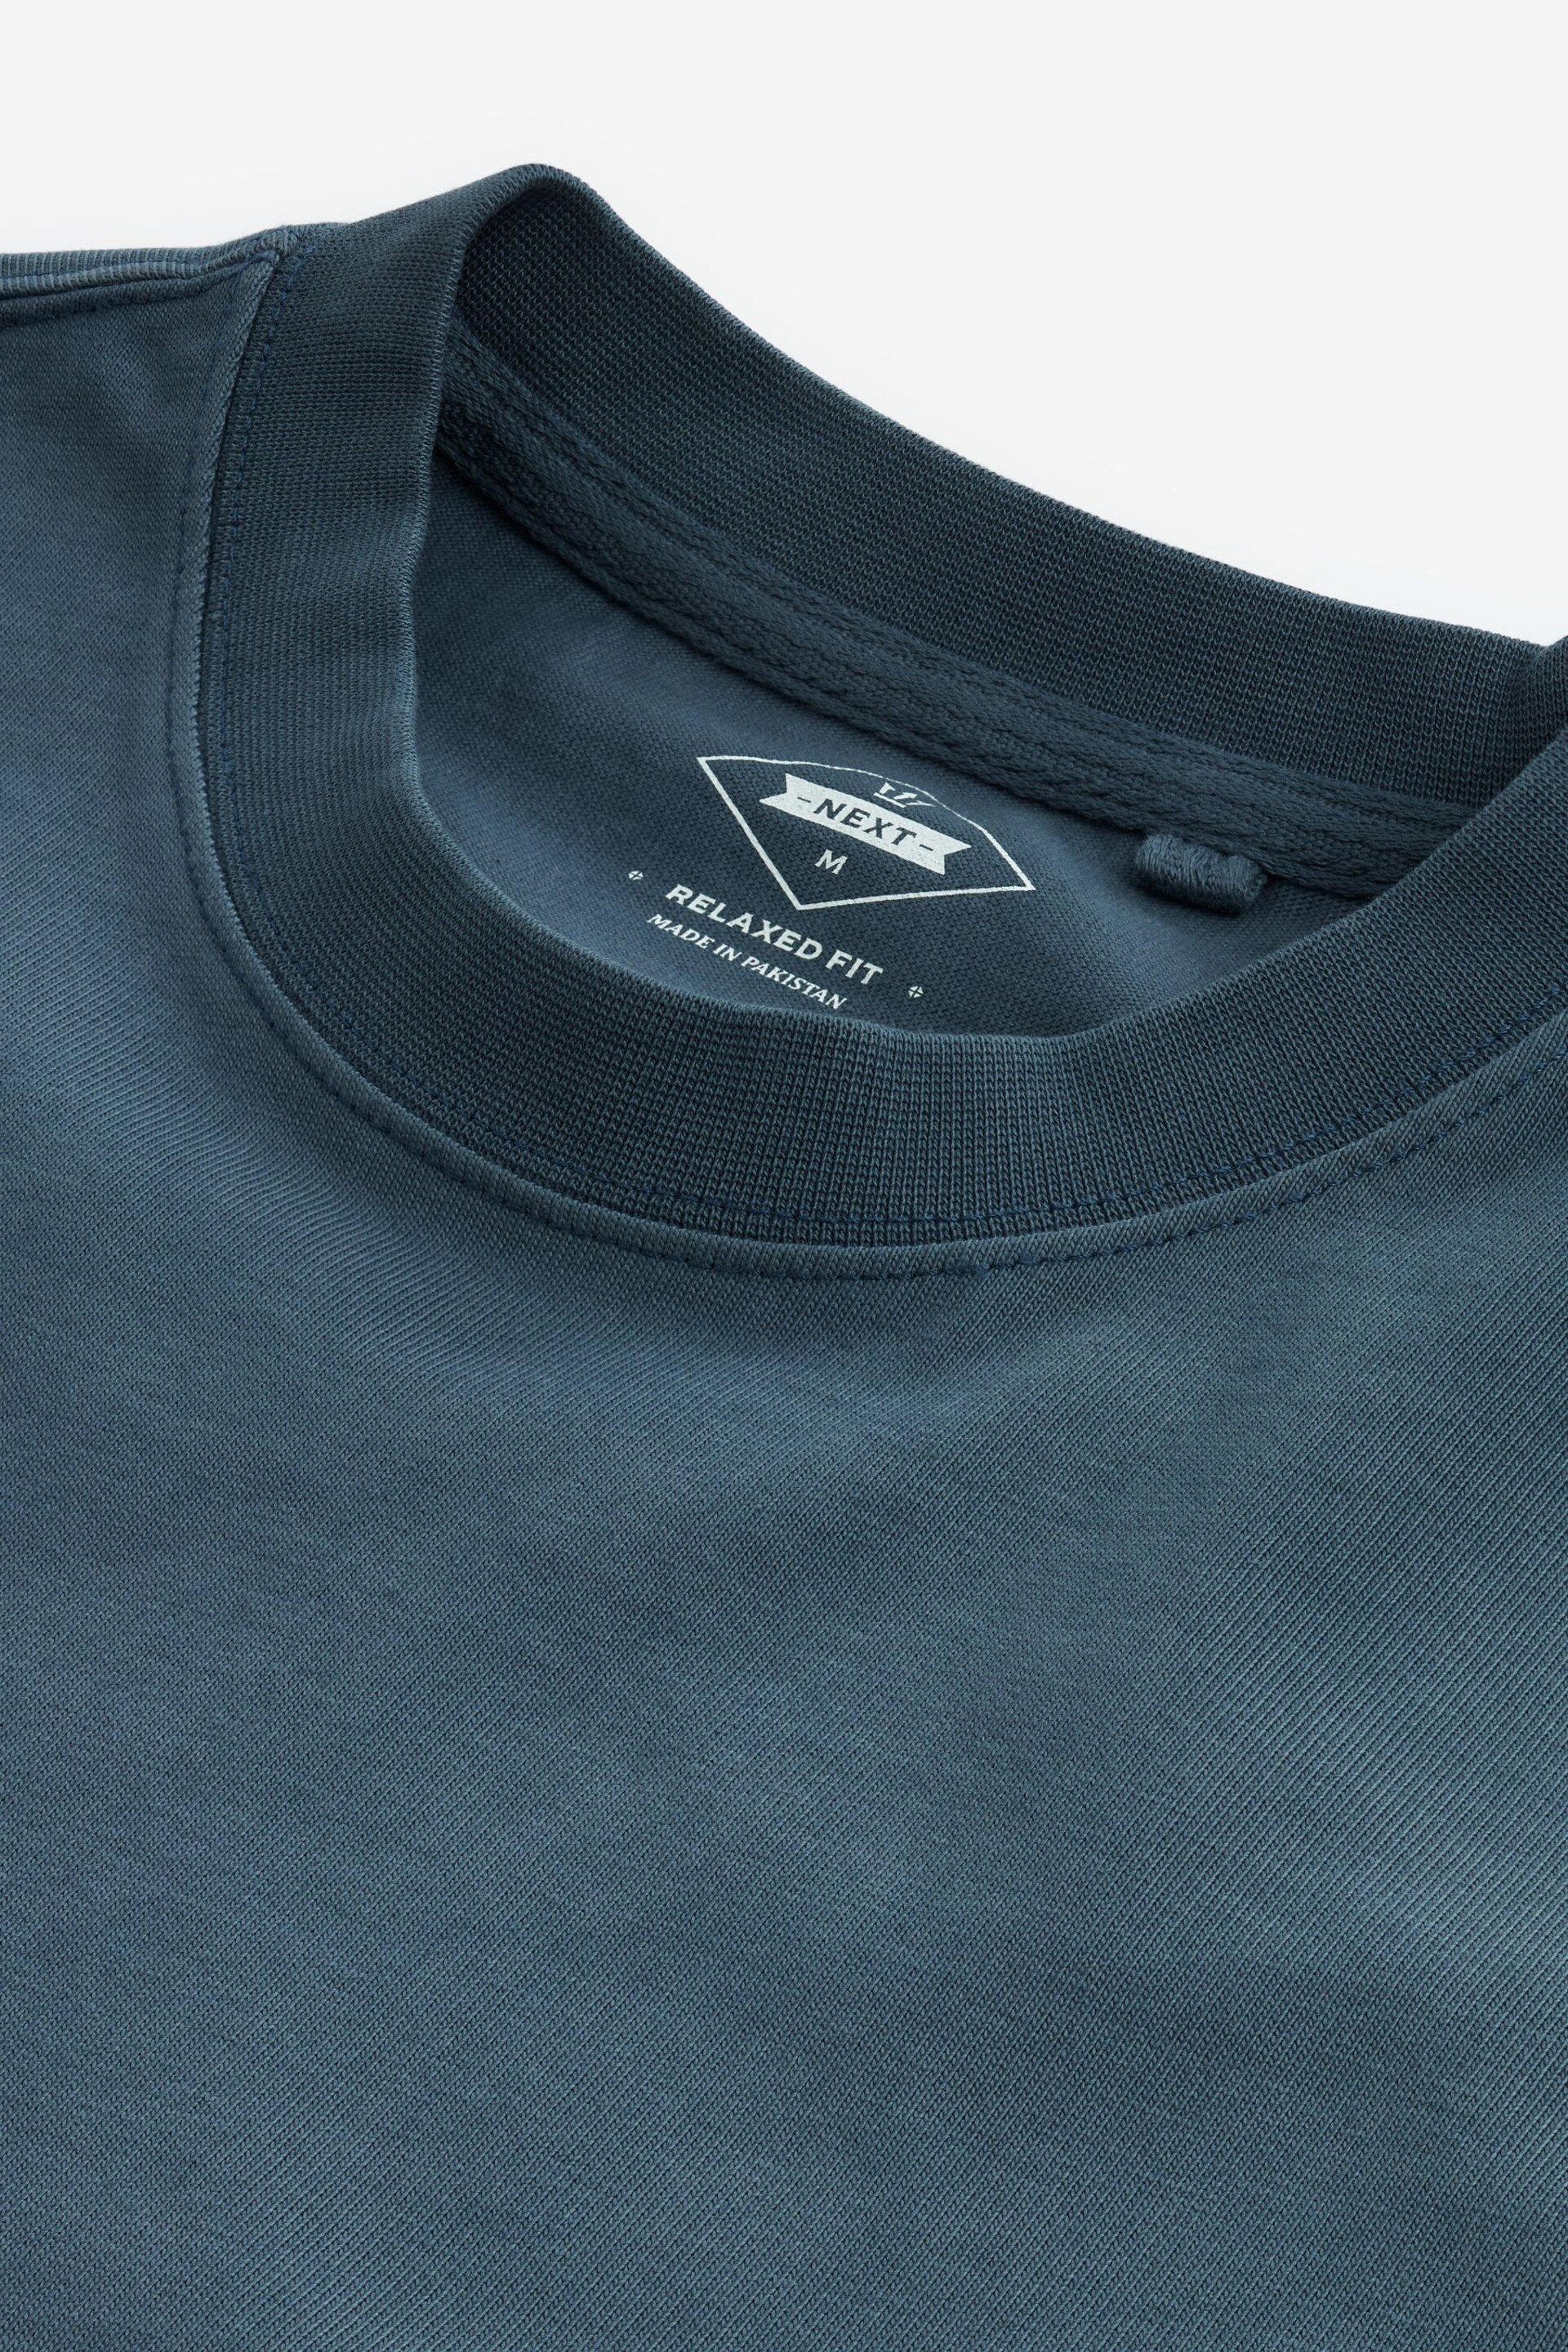 Navy Blue Garment Dye Relaxed Fit Heavyweight T-Shirt - Image 7 of 8